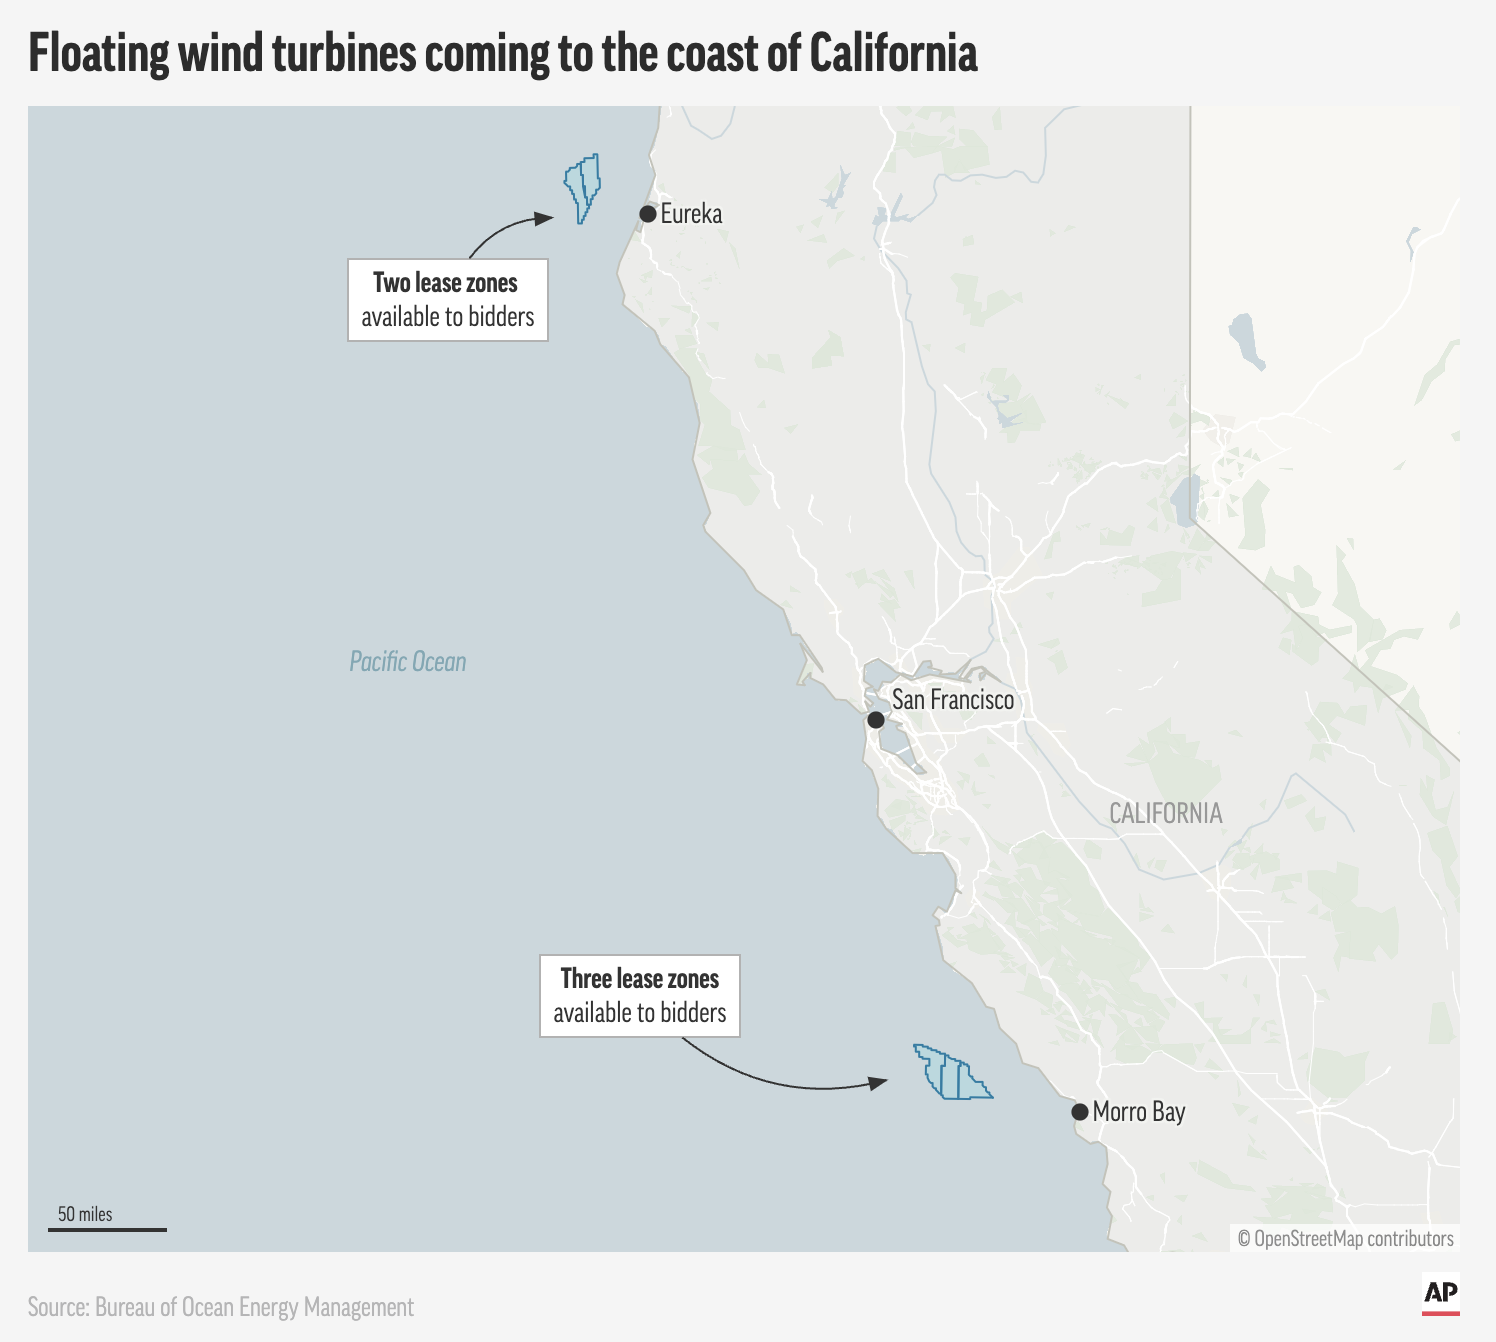 Map of California coastline showing parcels leased for wind turbines